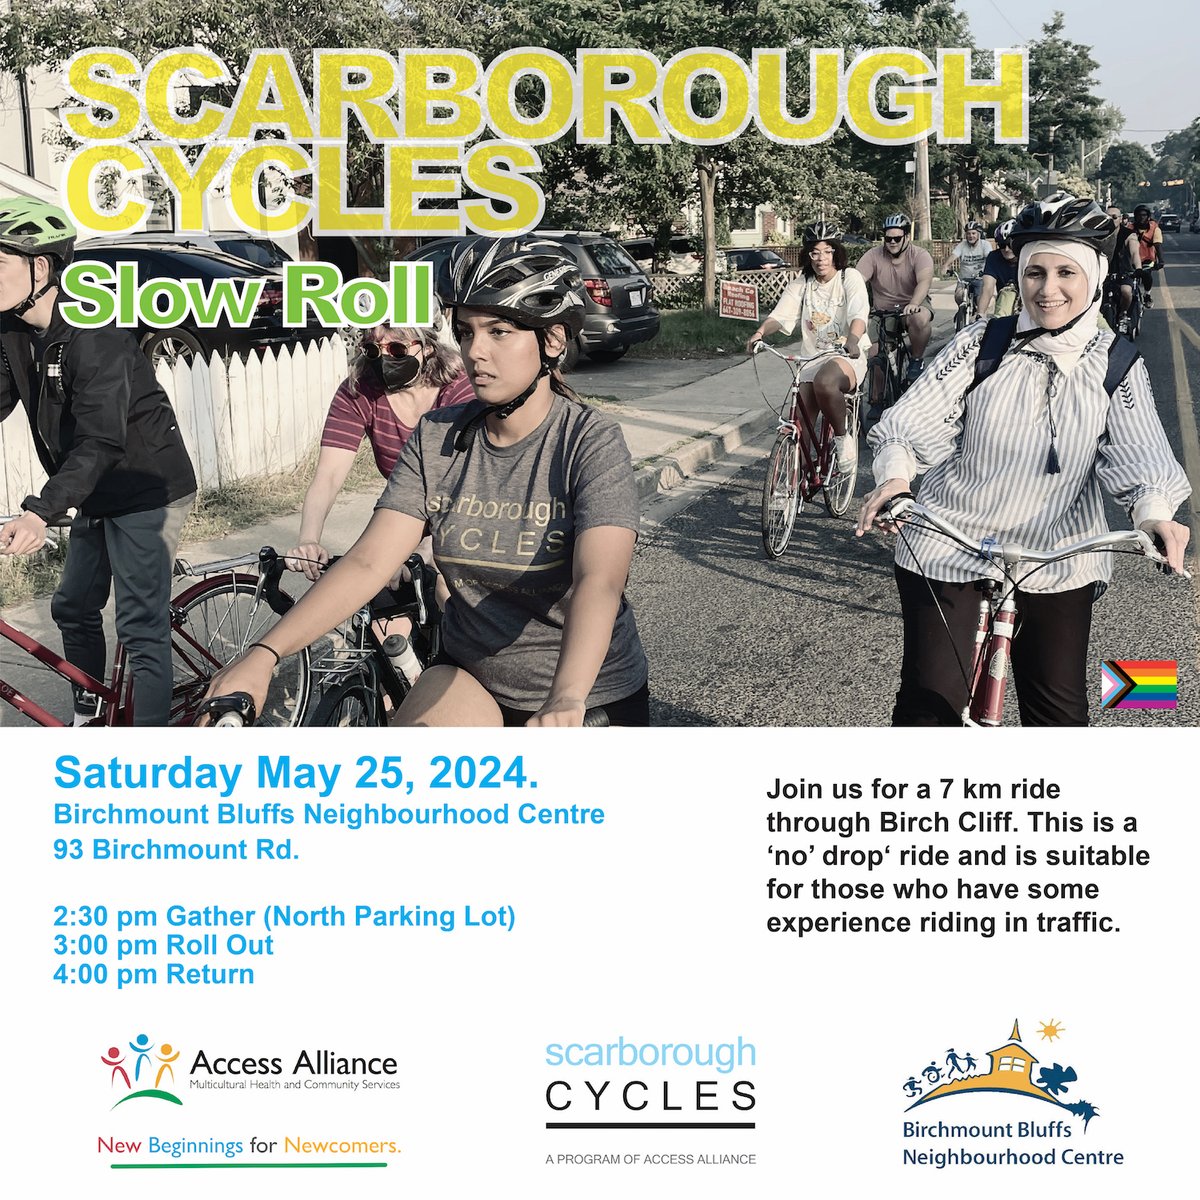 Join us our first Slow Roll of 2024, a 7 km ride through Birch Cliff!

Saturday May 25, 2024.
Birchmount Bluffs Neighbourhood Centre
93 Birchmount Rd

2:30 pm Gather (North Parking Lot)
3:00 pmRoll Out
4:00 pm Return

scarboroughcycles.ca/group-rides/

 #bikeTO #ScarbTO #Ward20